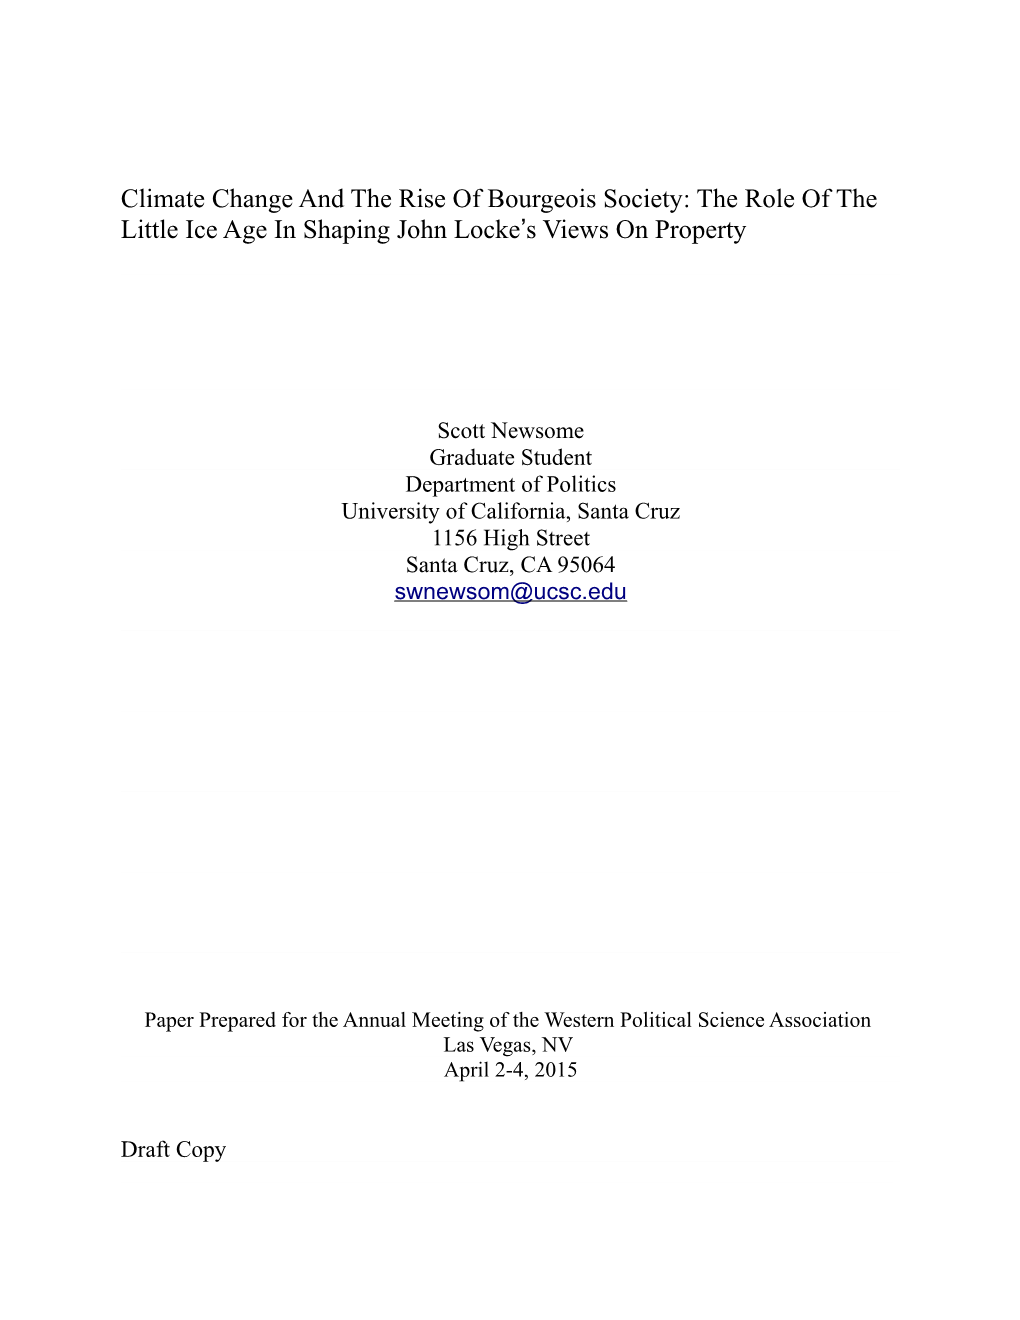 Climate Change and the Rise of Bourgeois Society: the Role of the Little Ice Age in Shaping